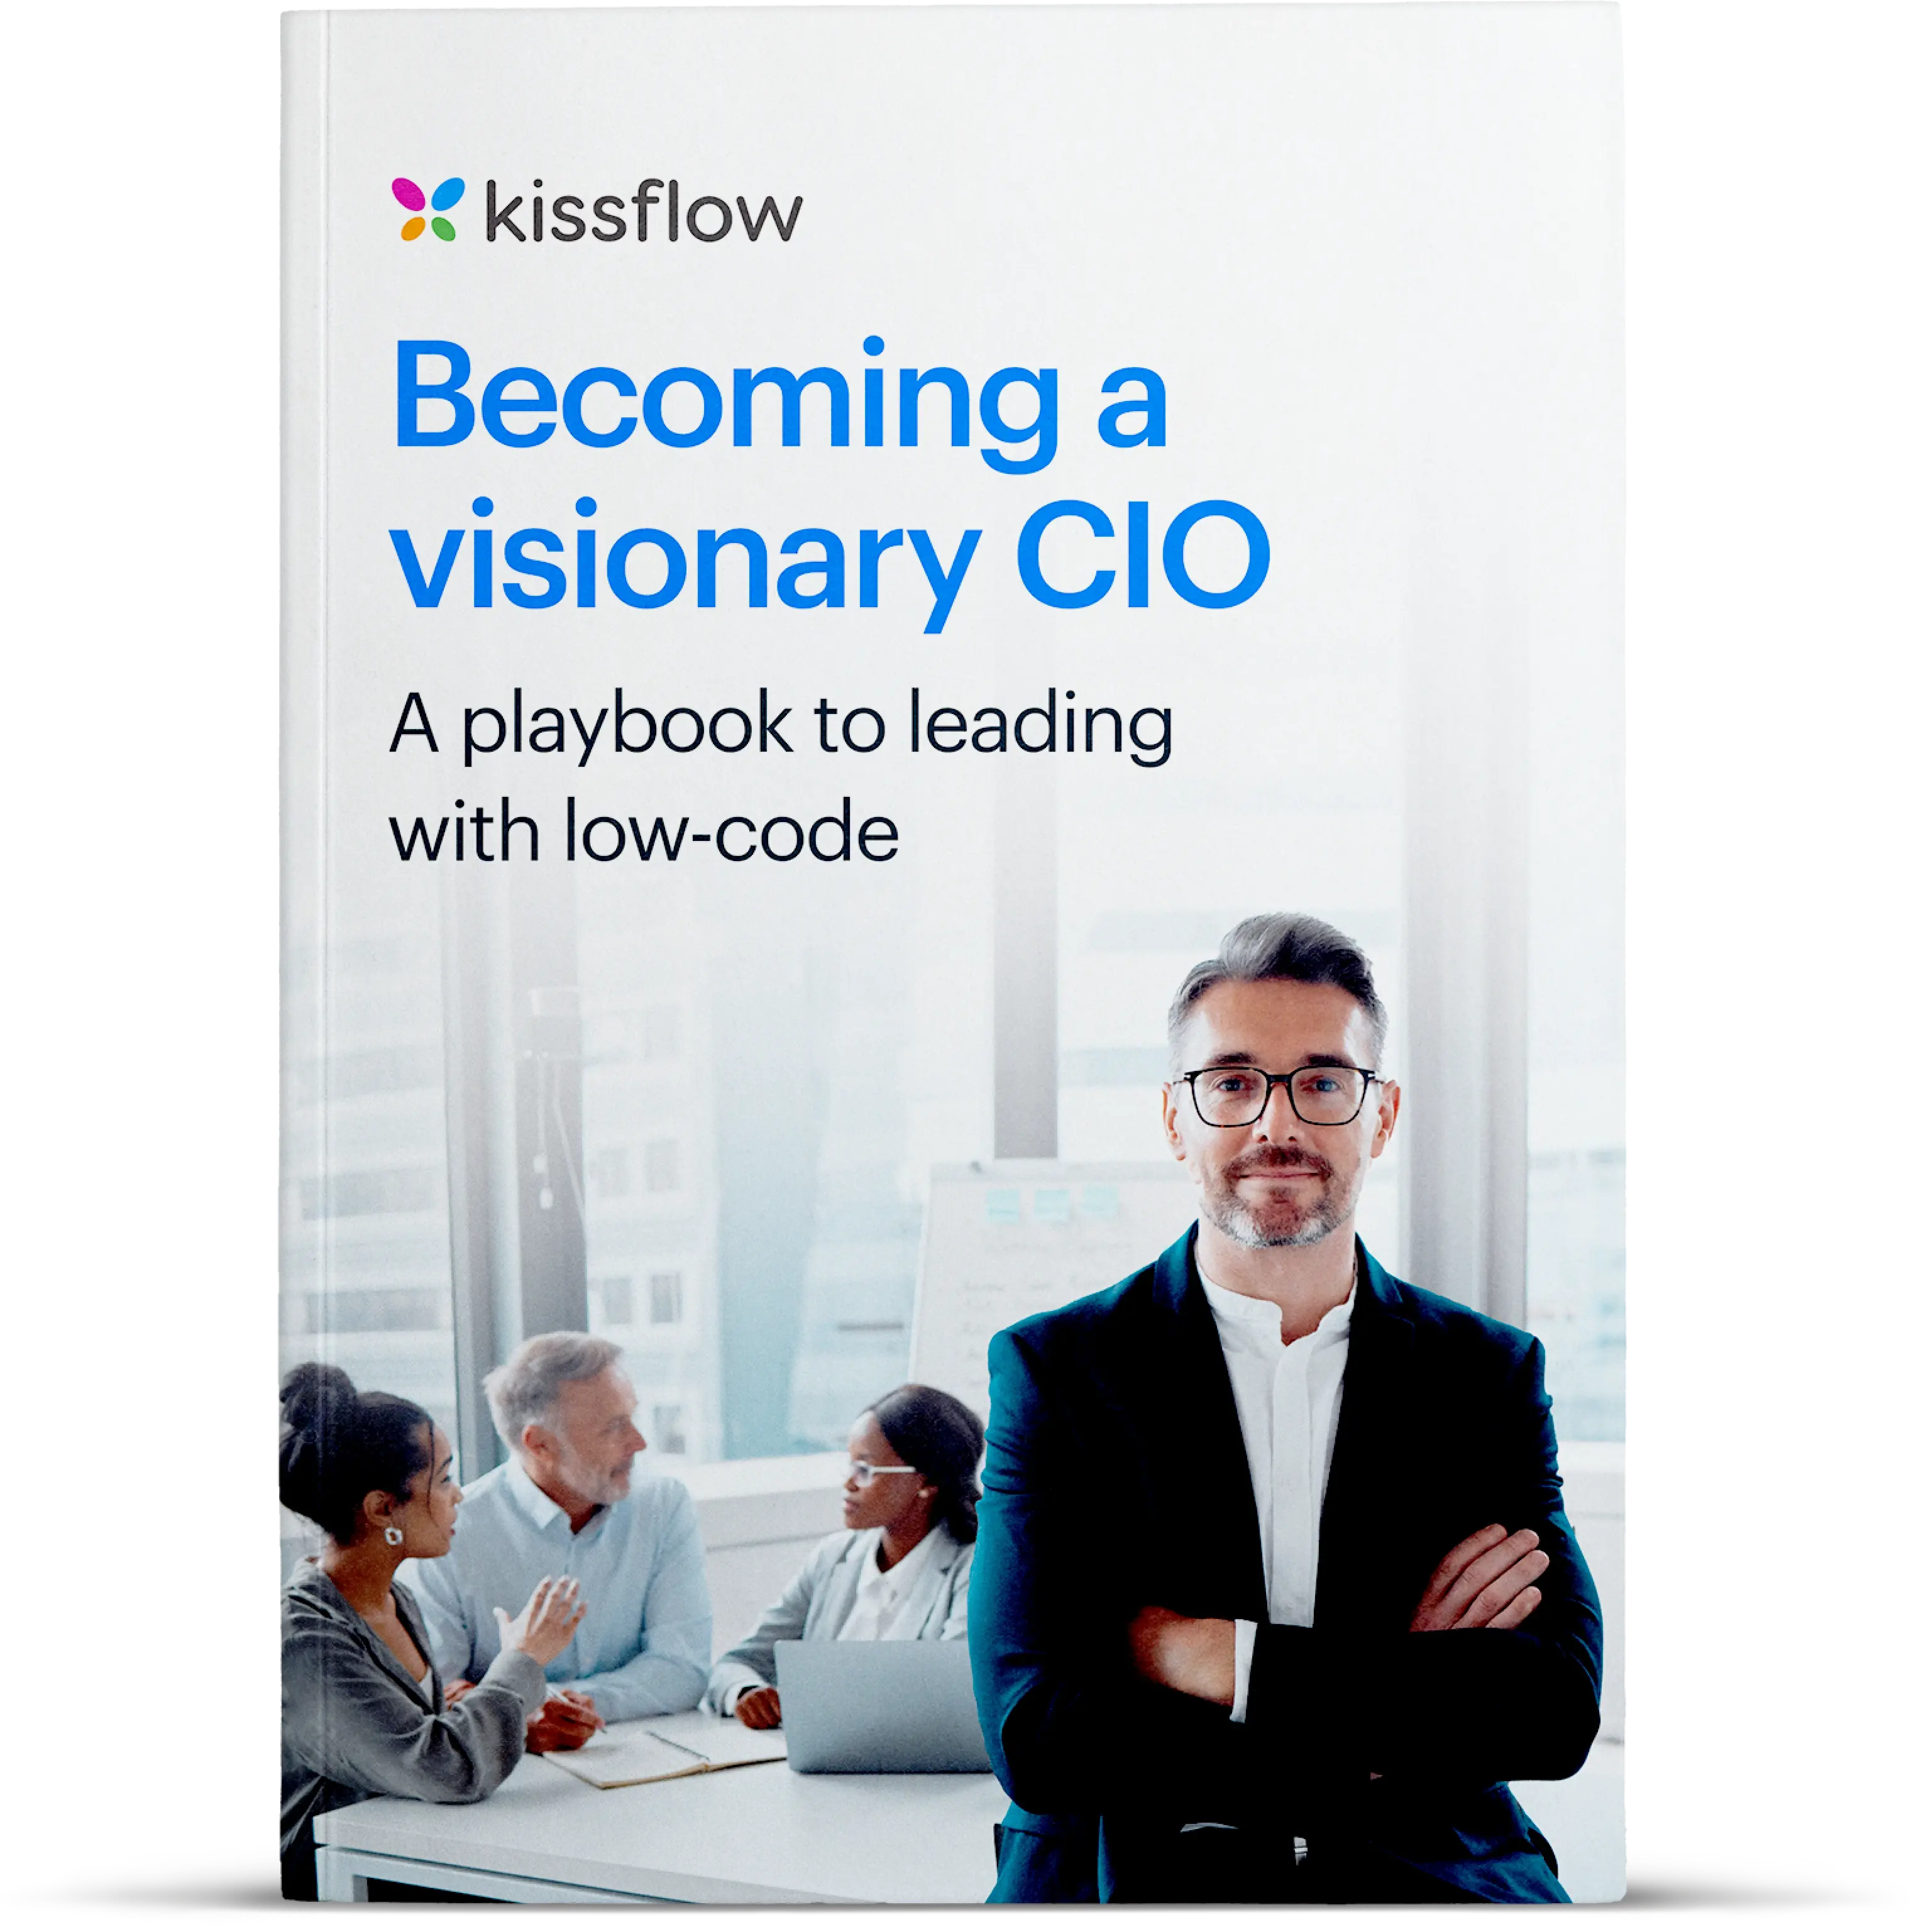 Becoming a visionary CIO - A playbook to leading with low-code